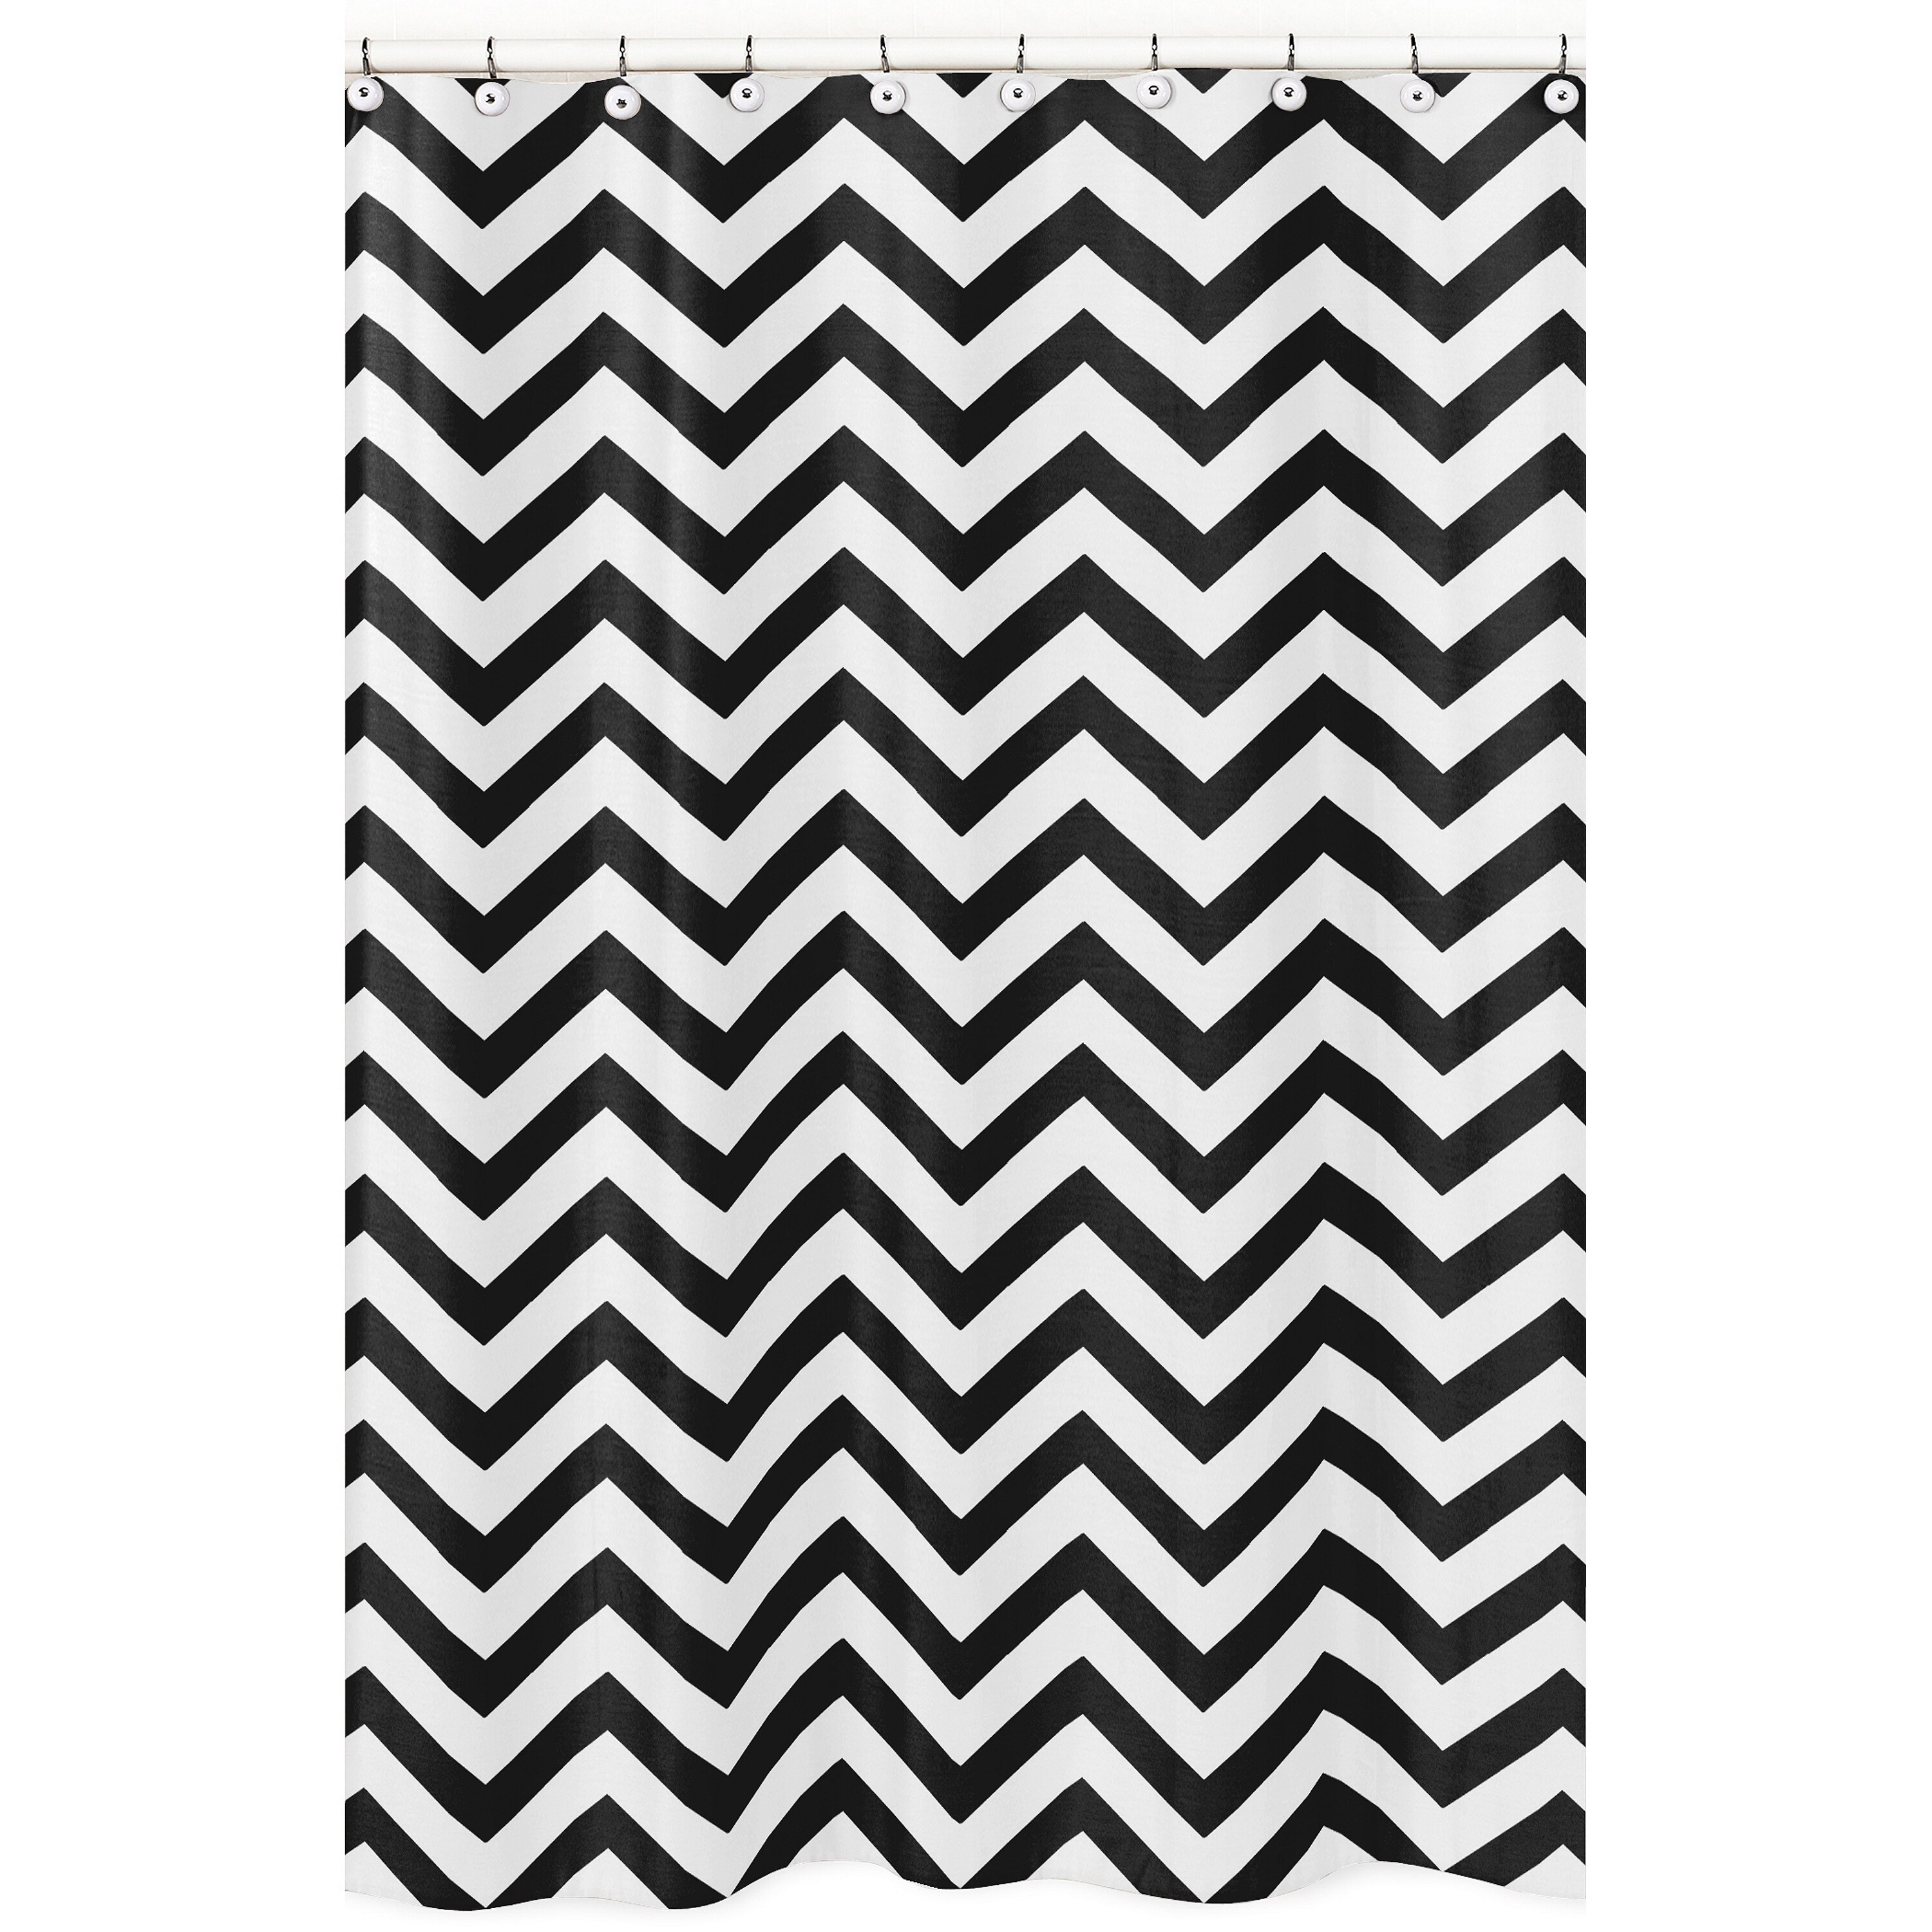 Sweet Jojo Designs Black/ White Chevron Zigzag Shower Curtain (Black/ whiteMaterials Brushed microfiberDimensions 72 inches x 72 inches longCare instructions Machine washableThe digital images we display have the most accurate color possible. However, 